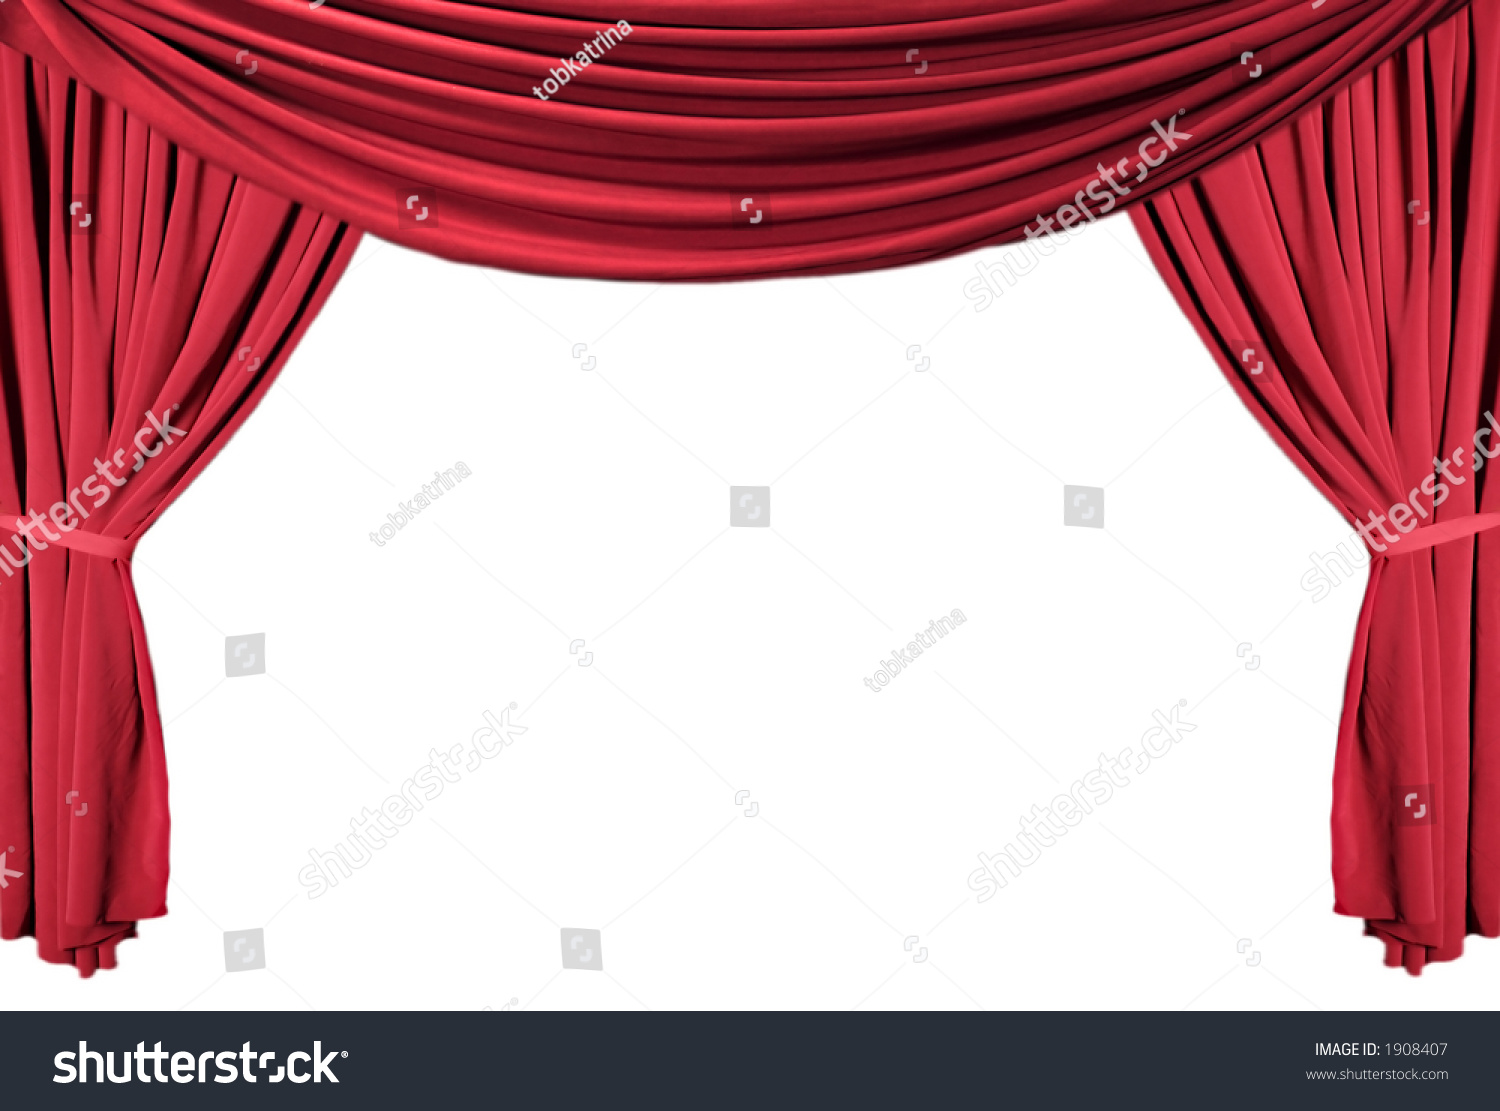 Isolated Red Draped Theater Curtains Series Stock Photo 1908407 ...